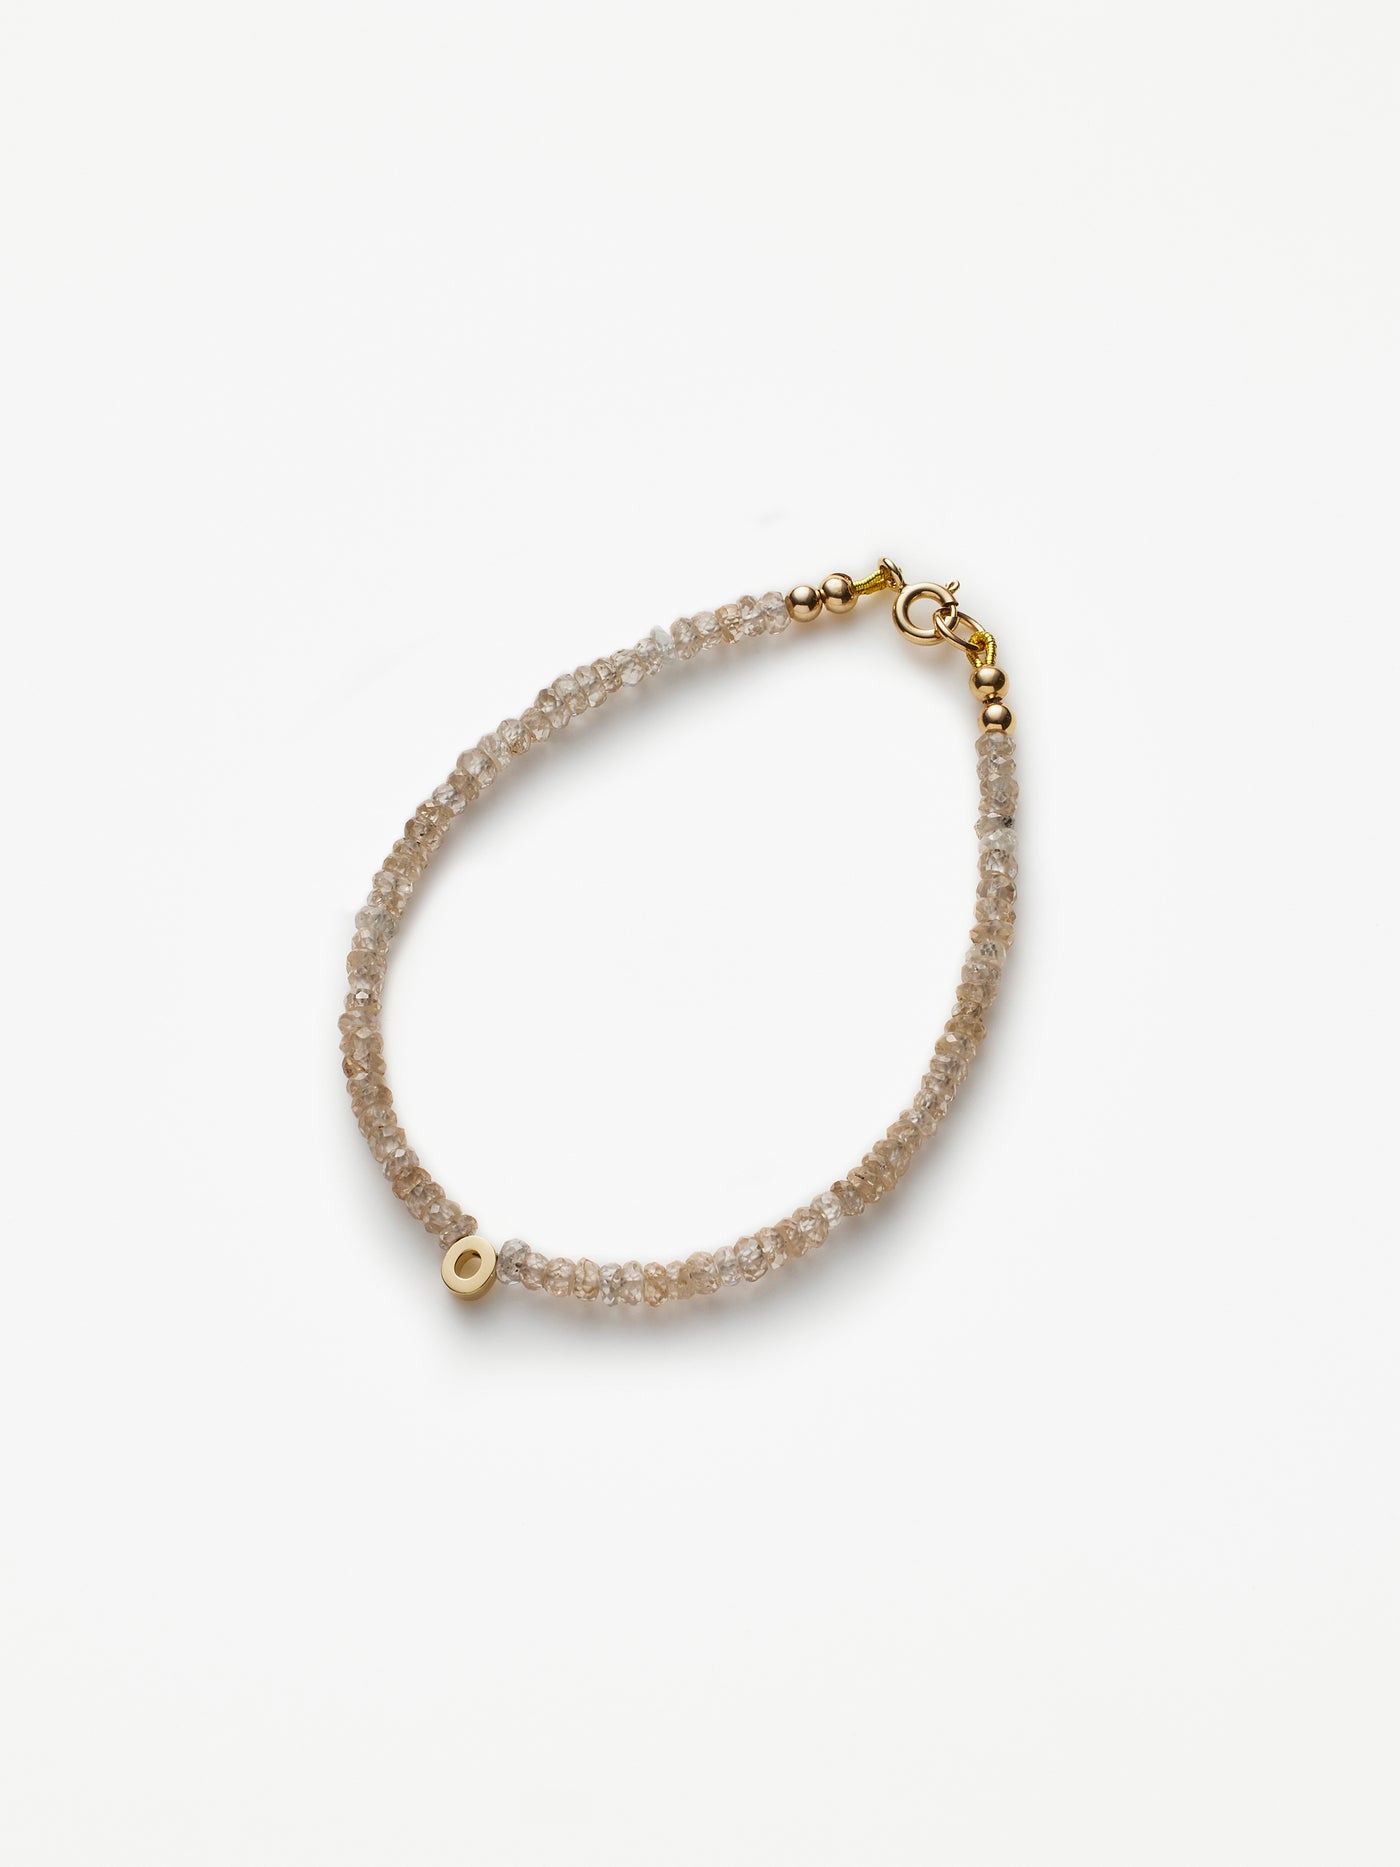 Hand-strung bracelet with natural natural zircon gemstones and miniature three-dimensional letter in 18k solid gold